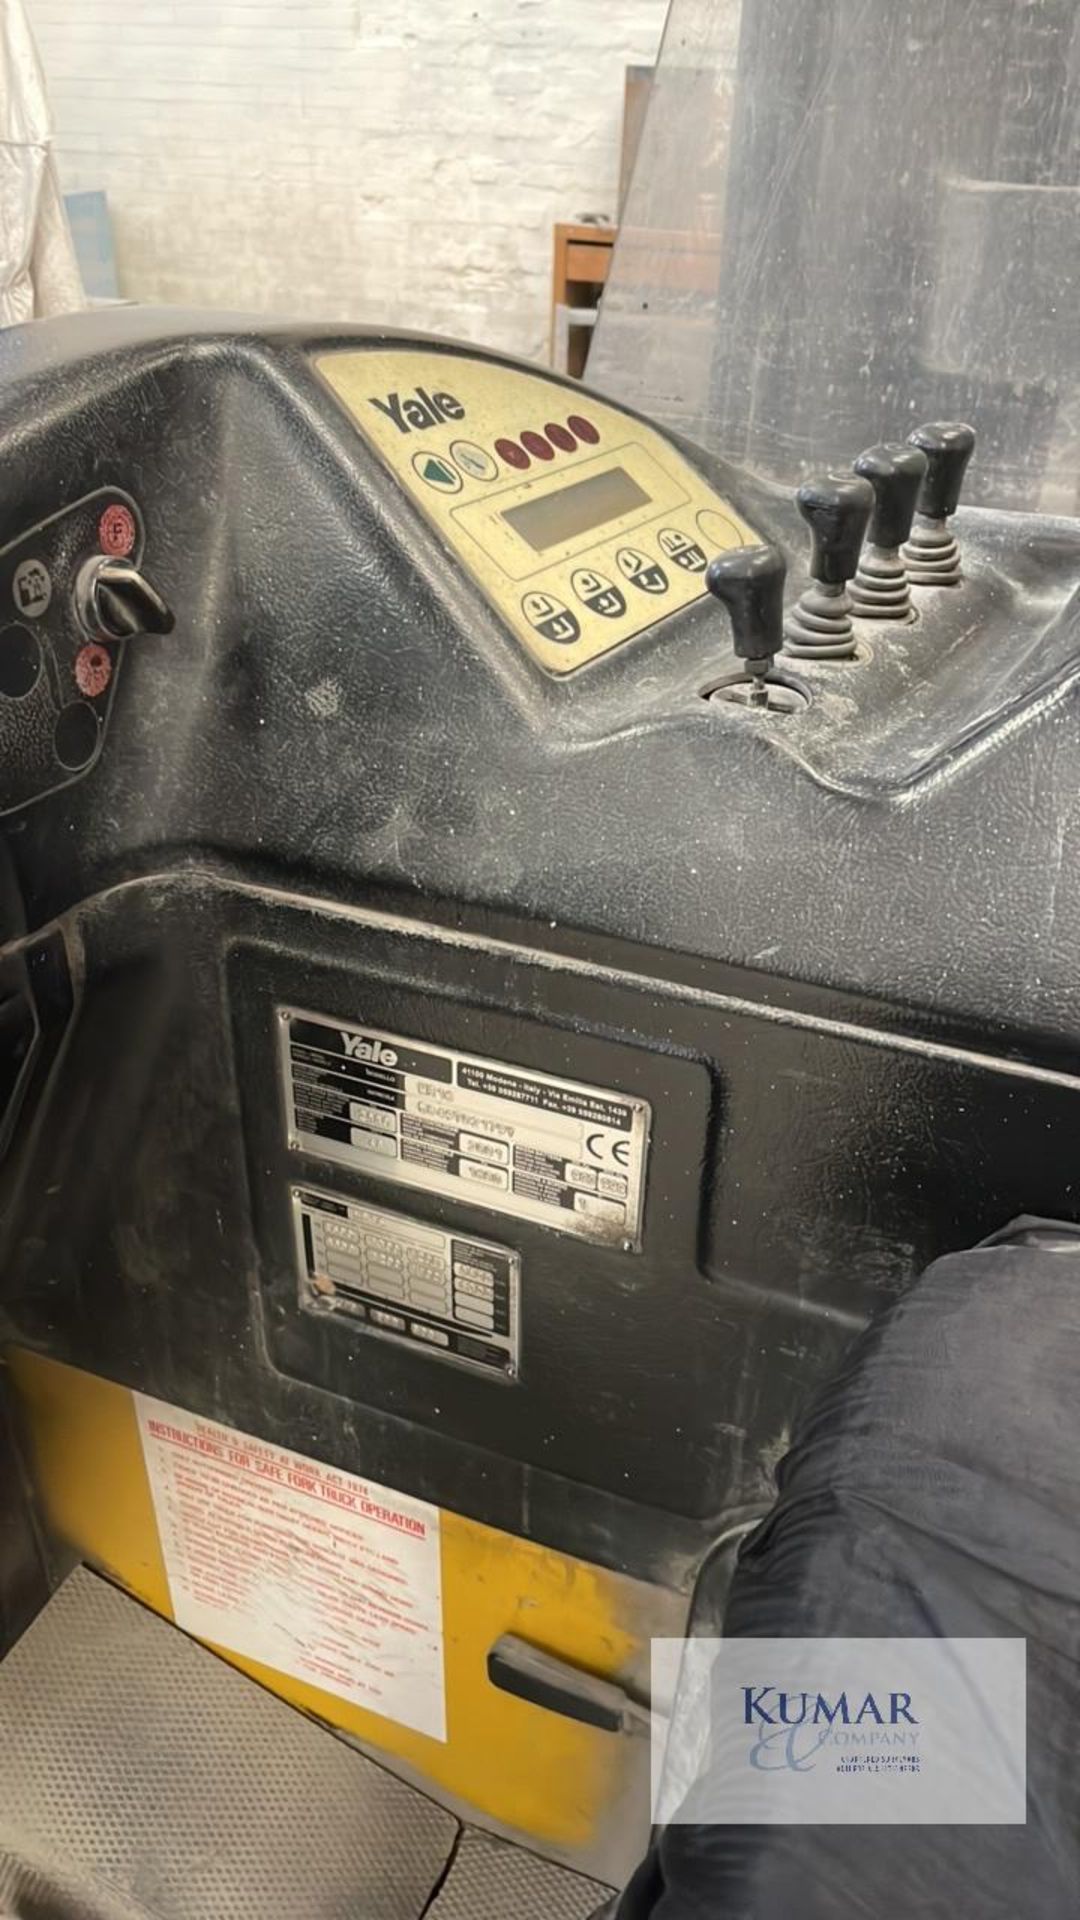 Yale Model MR16 Fork Lift Truck Serial No. B849T02179Y with Charging unit - Image 5 of 7